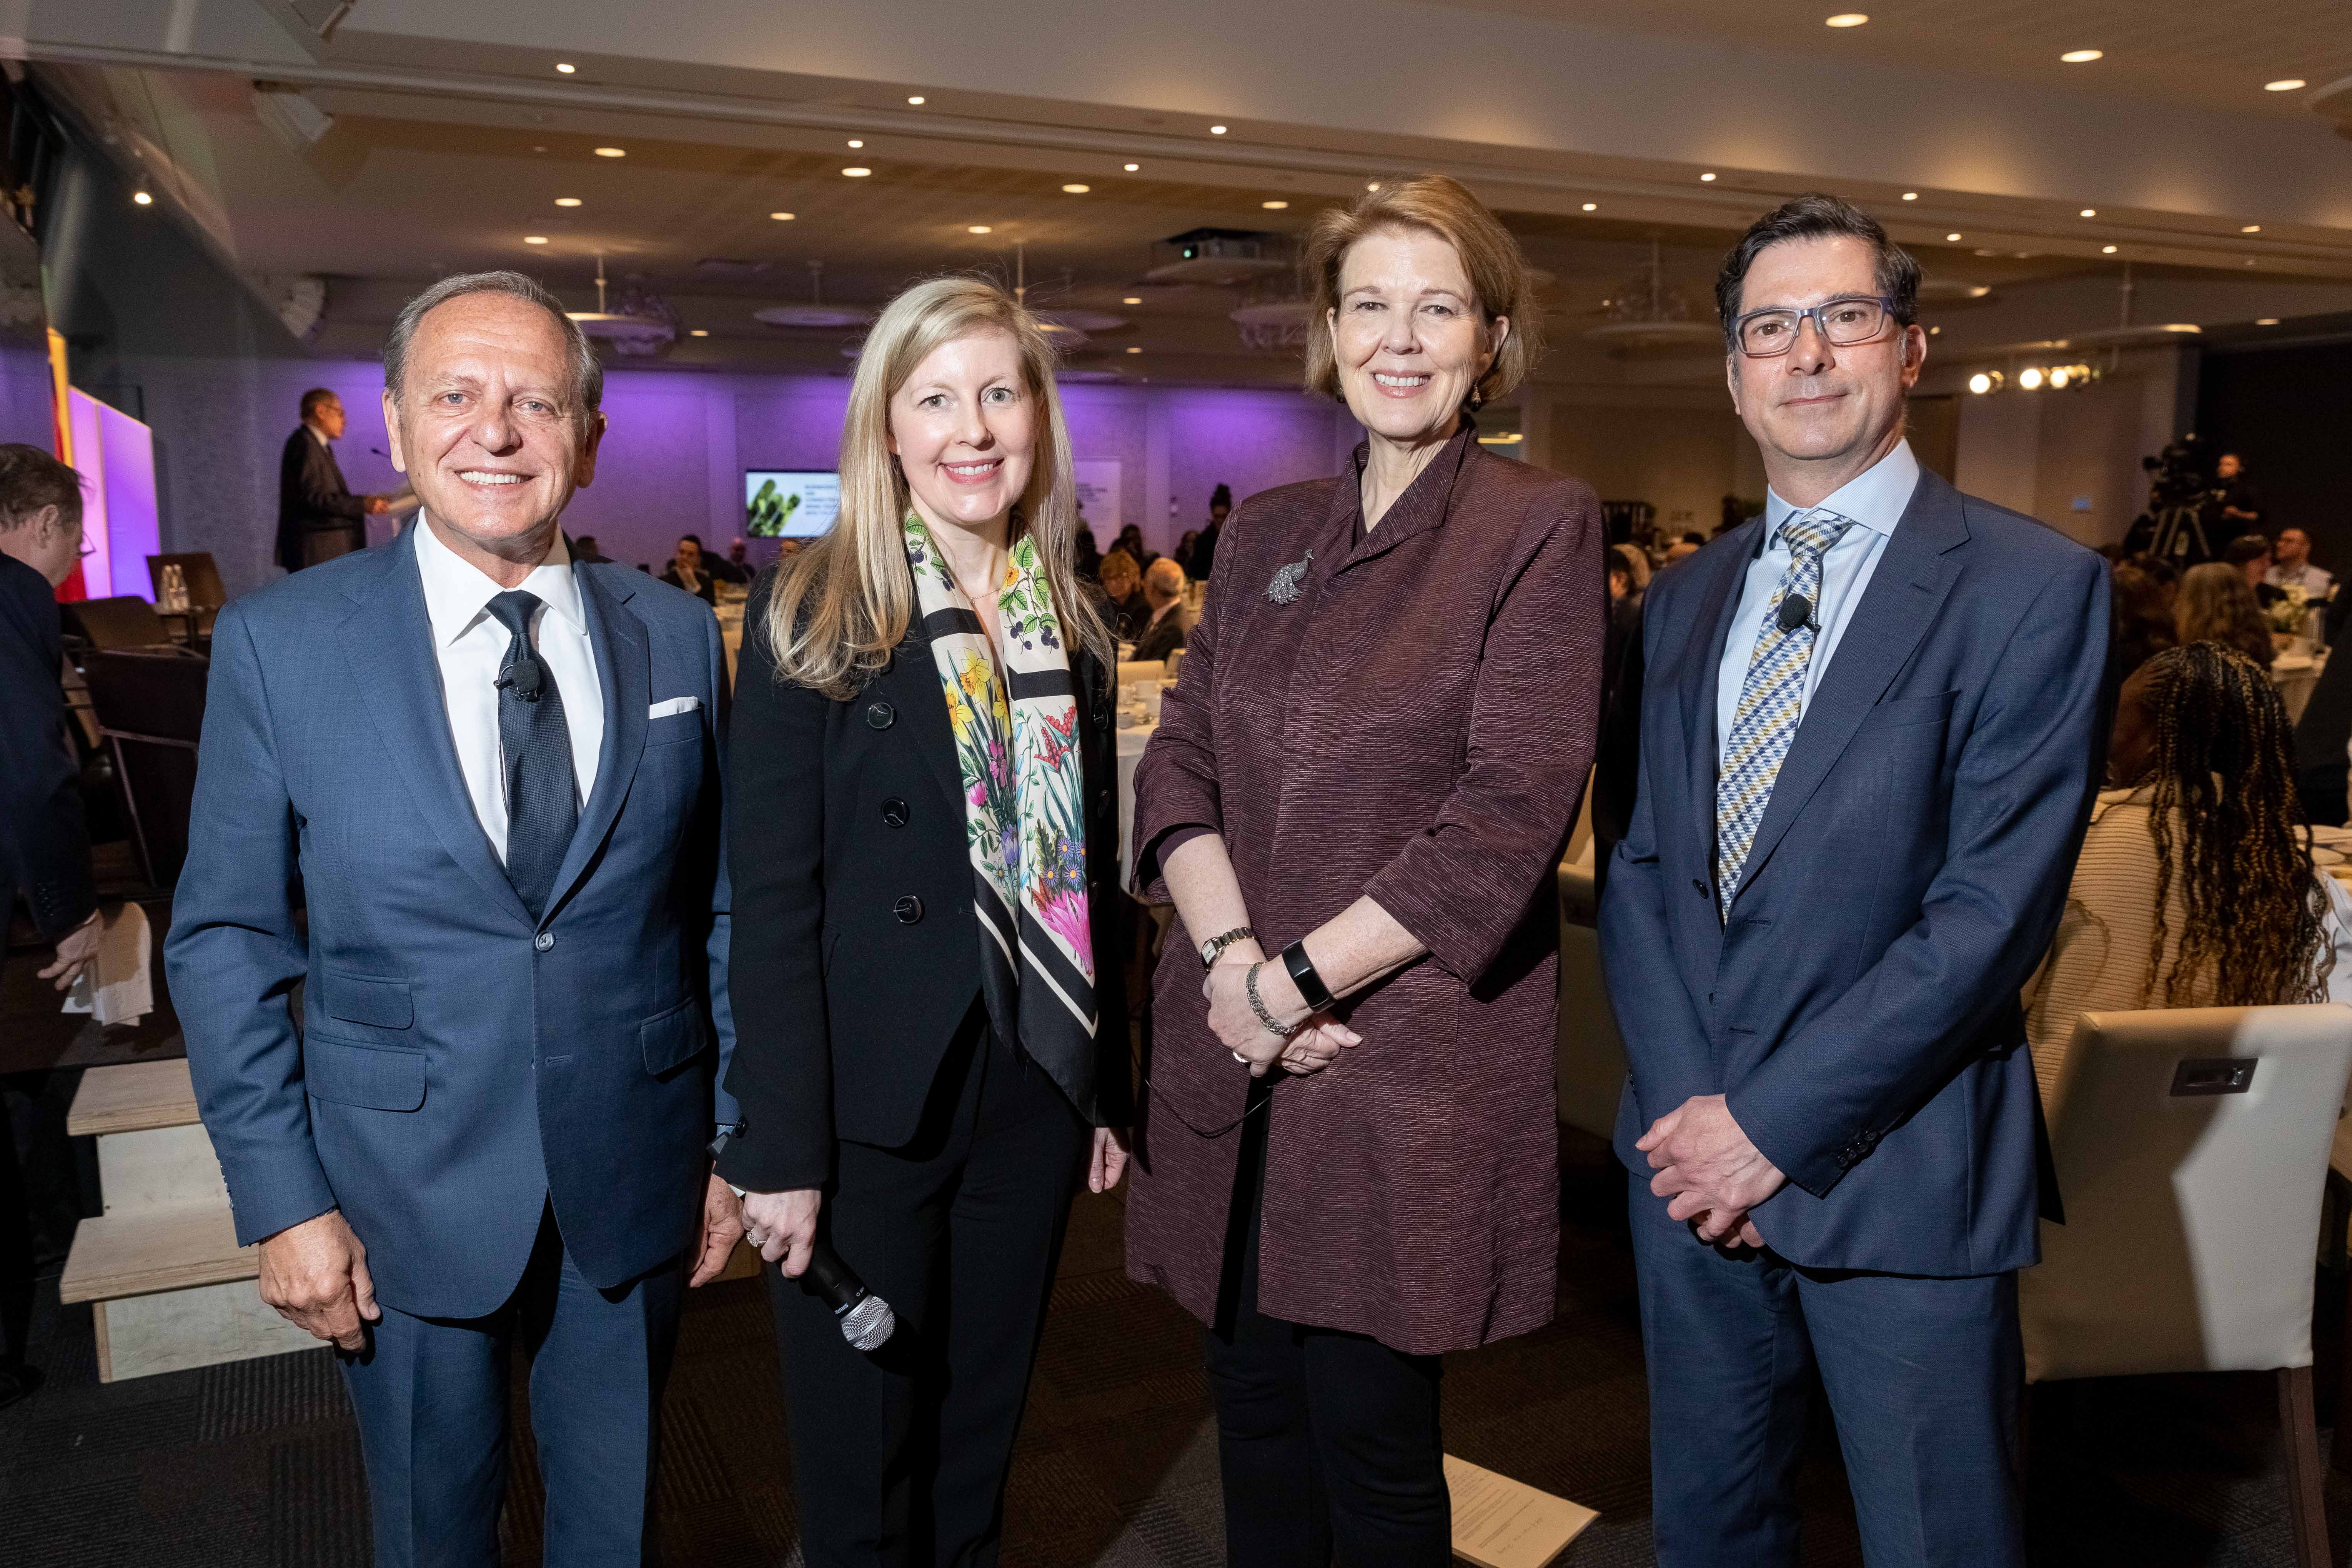 LiUNA’s Joseph Mancinelli, Kim Vander Aerschot of PwC, Dr. Susan Black of the Conference Board of Canada and Dominic Cole-Morgan of Scotiabank pose for a photo at our 2022 Workforce Summit.